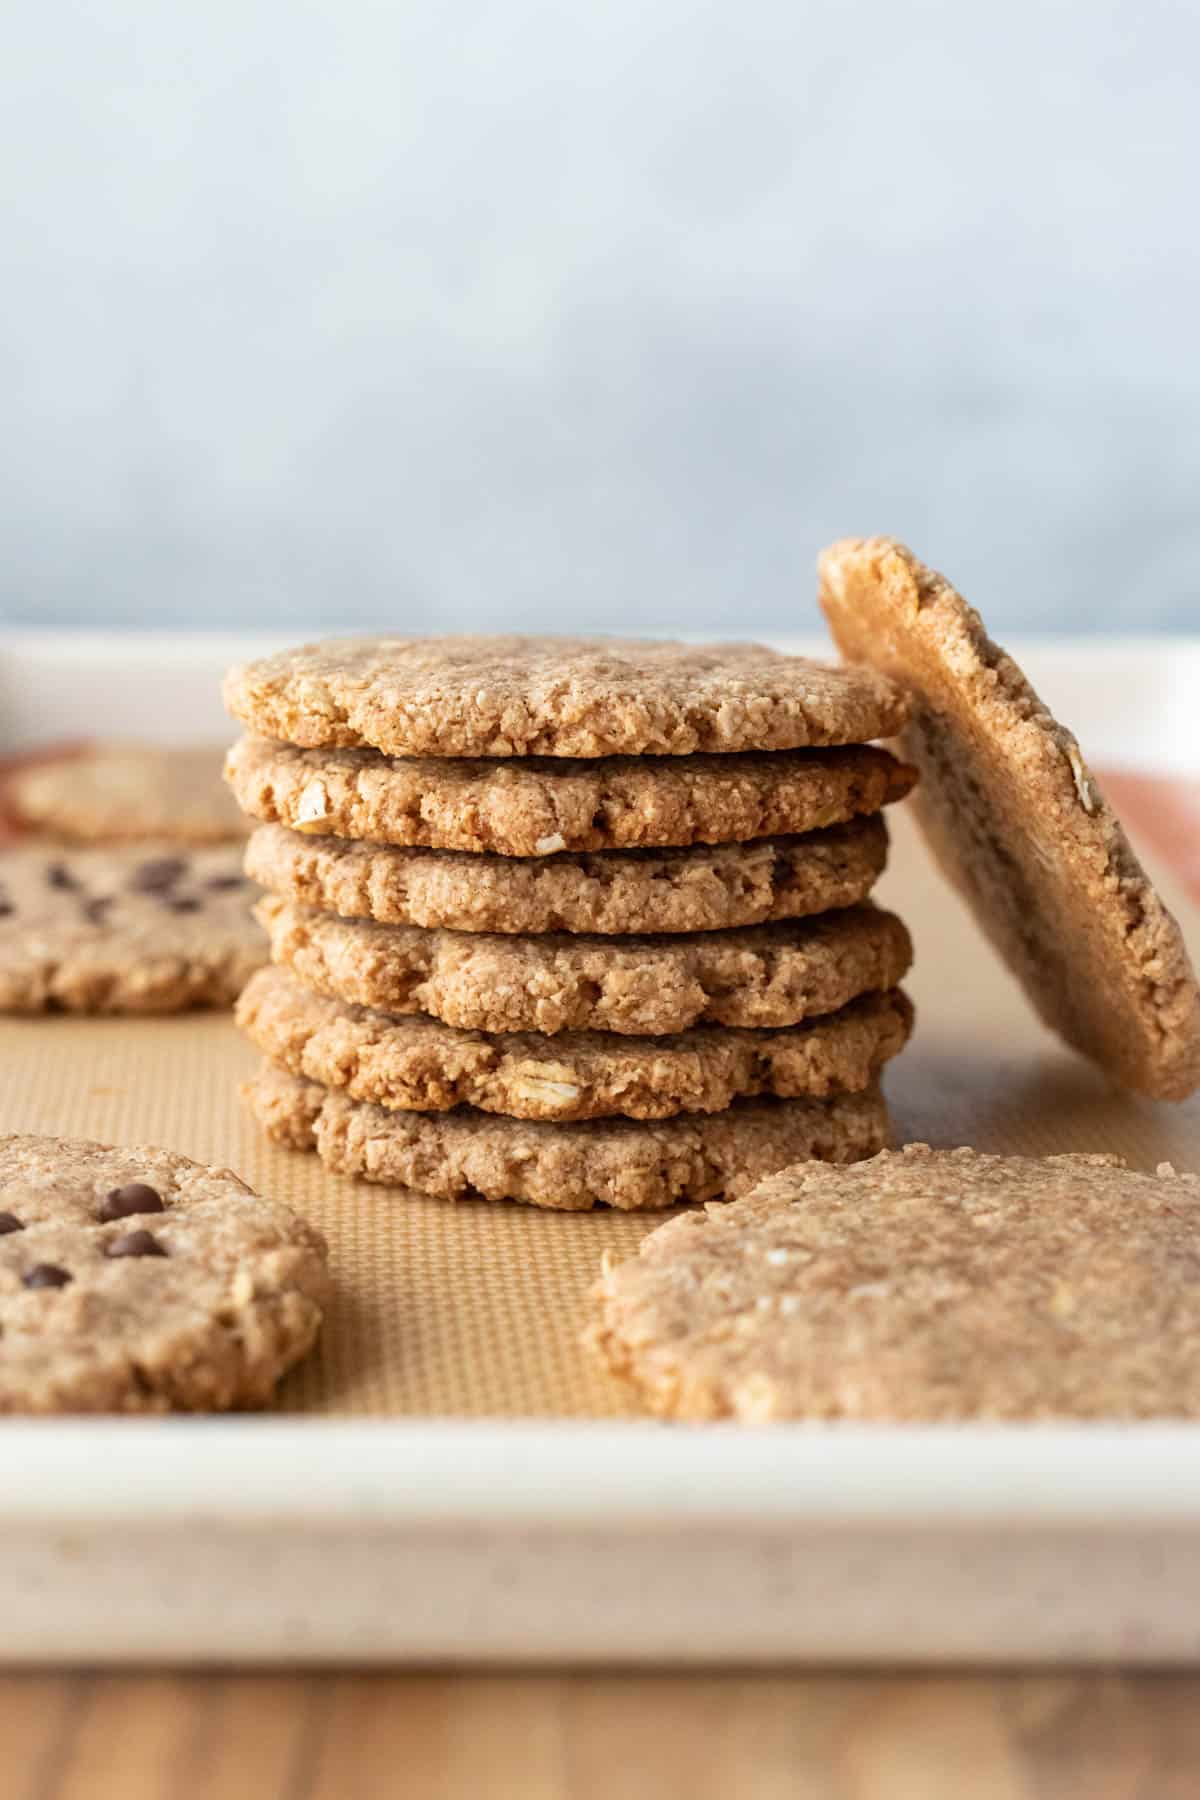 a stack of cookies, some with chocolate chips, with one crispy cookie leaning against the stack to show the golden bottoms.